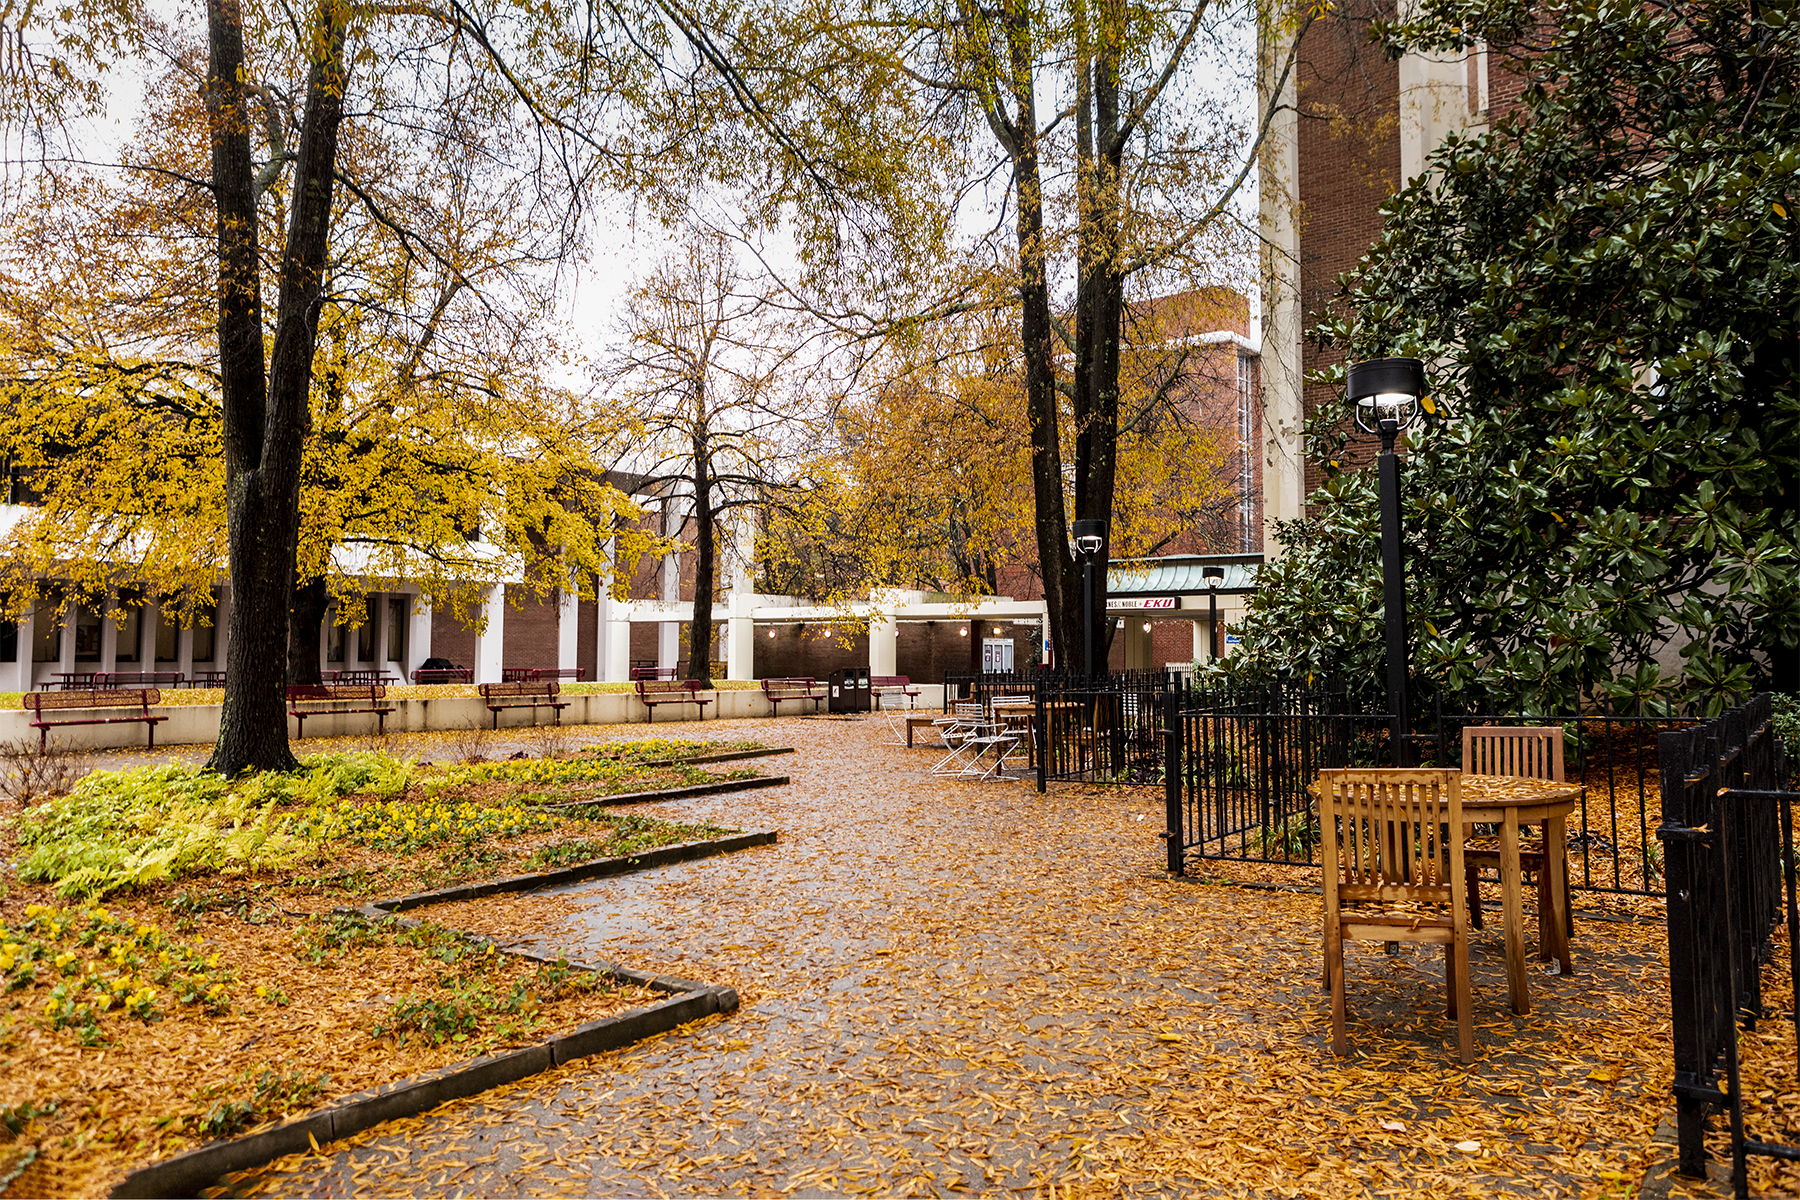 Wet leaves covering the ground and tables behind Keen Johnson